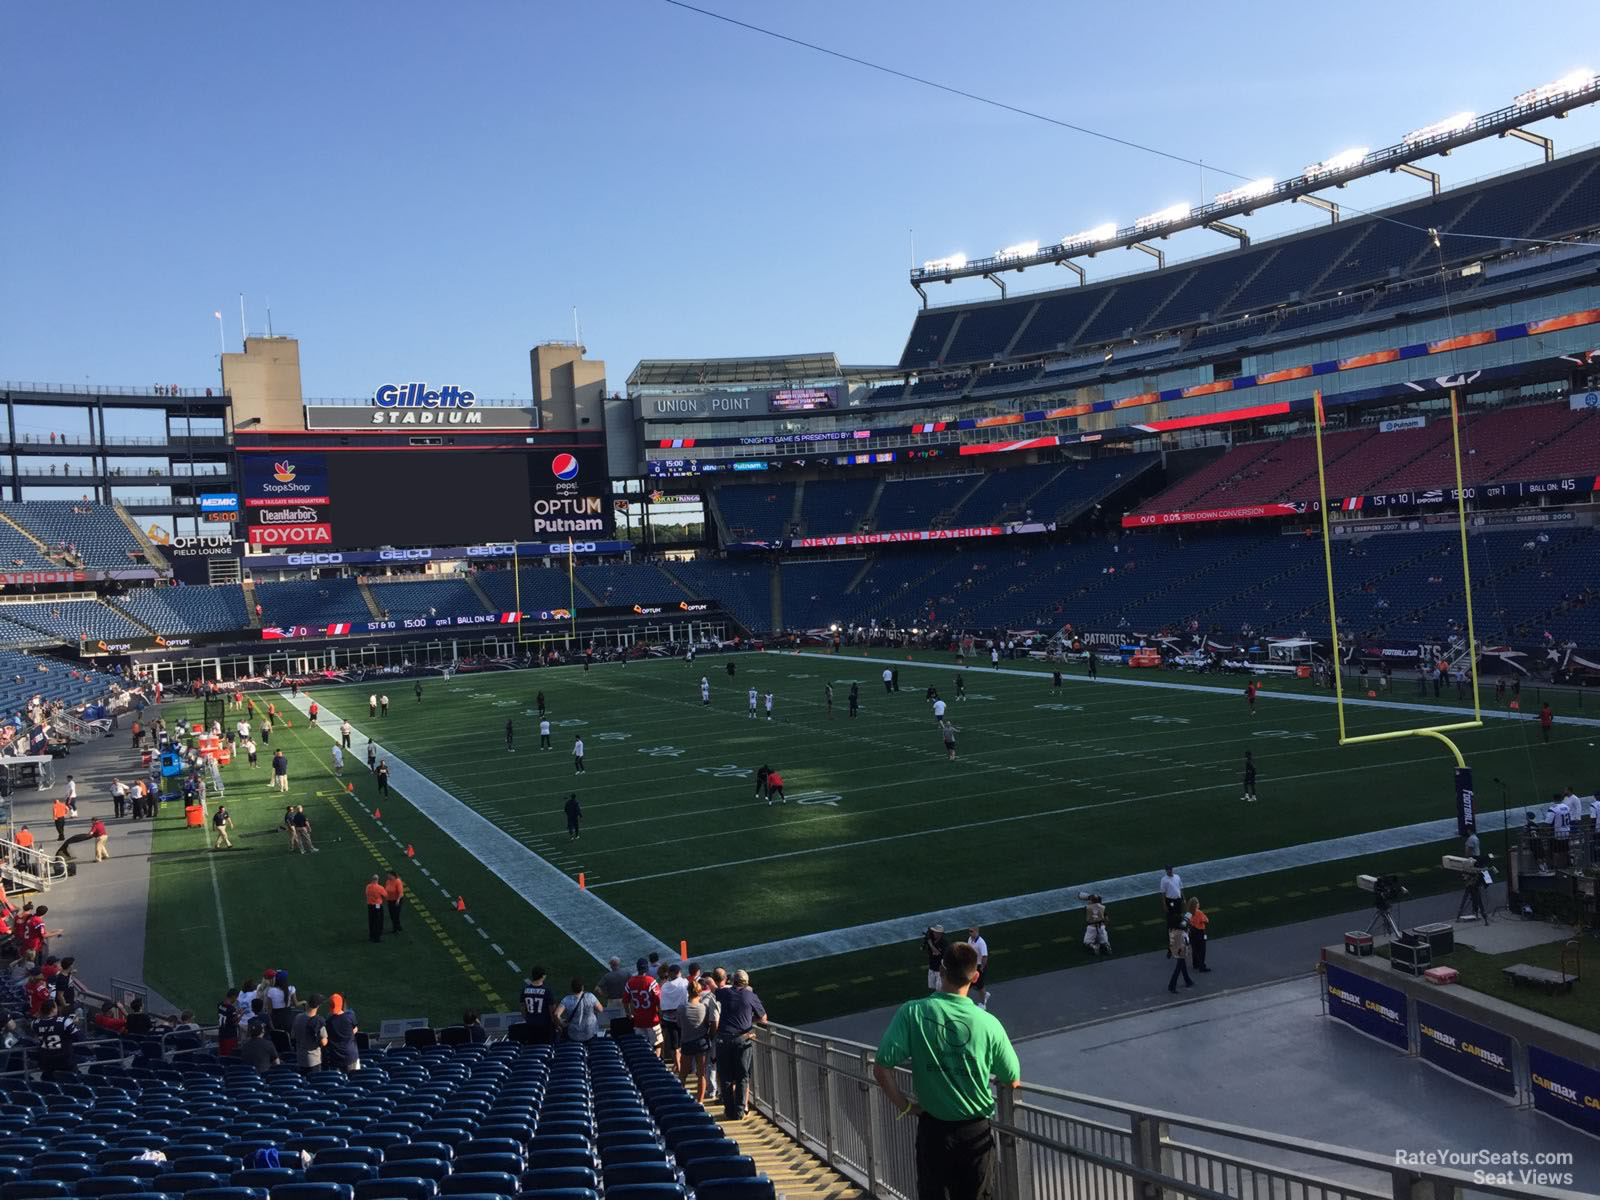 section 101, row 29 seat view  for football - gillette stadium